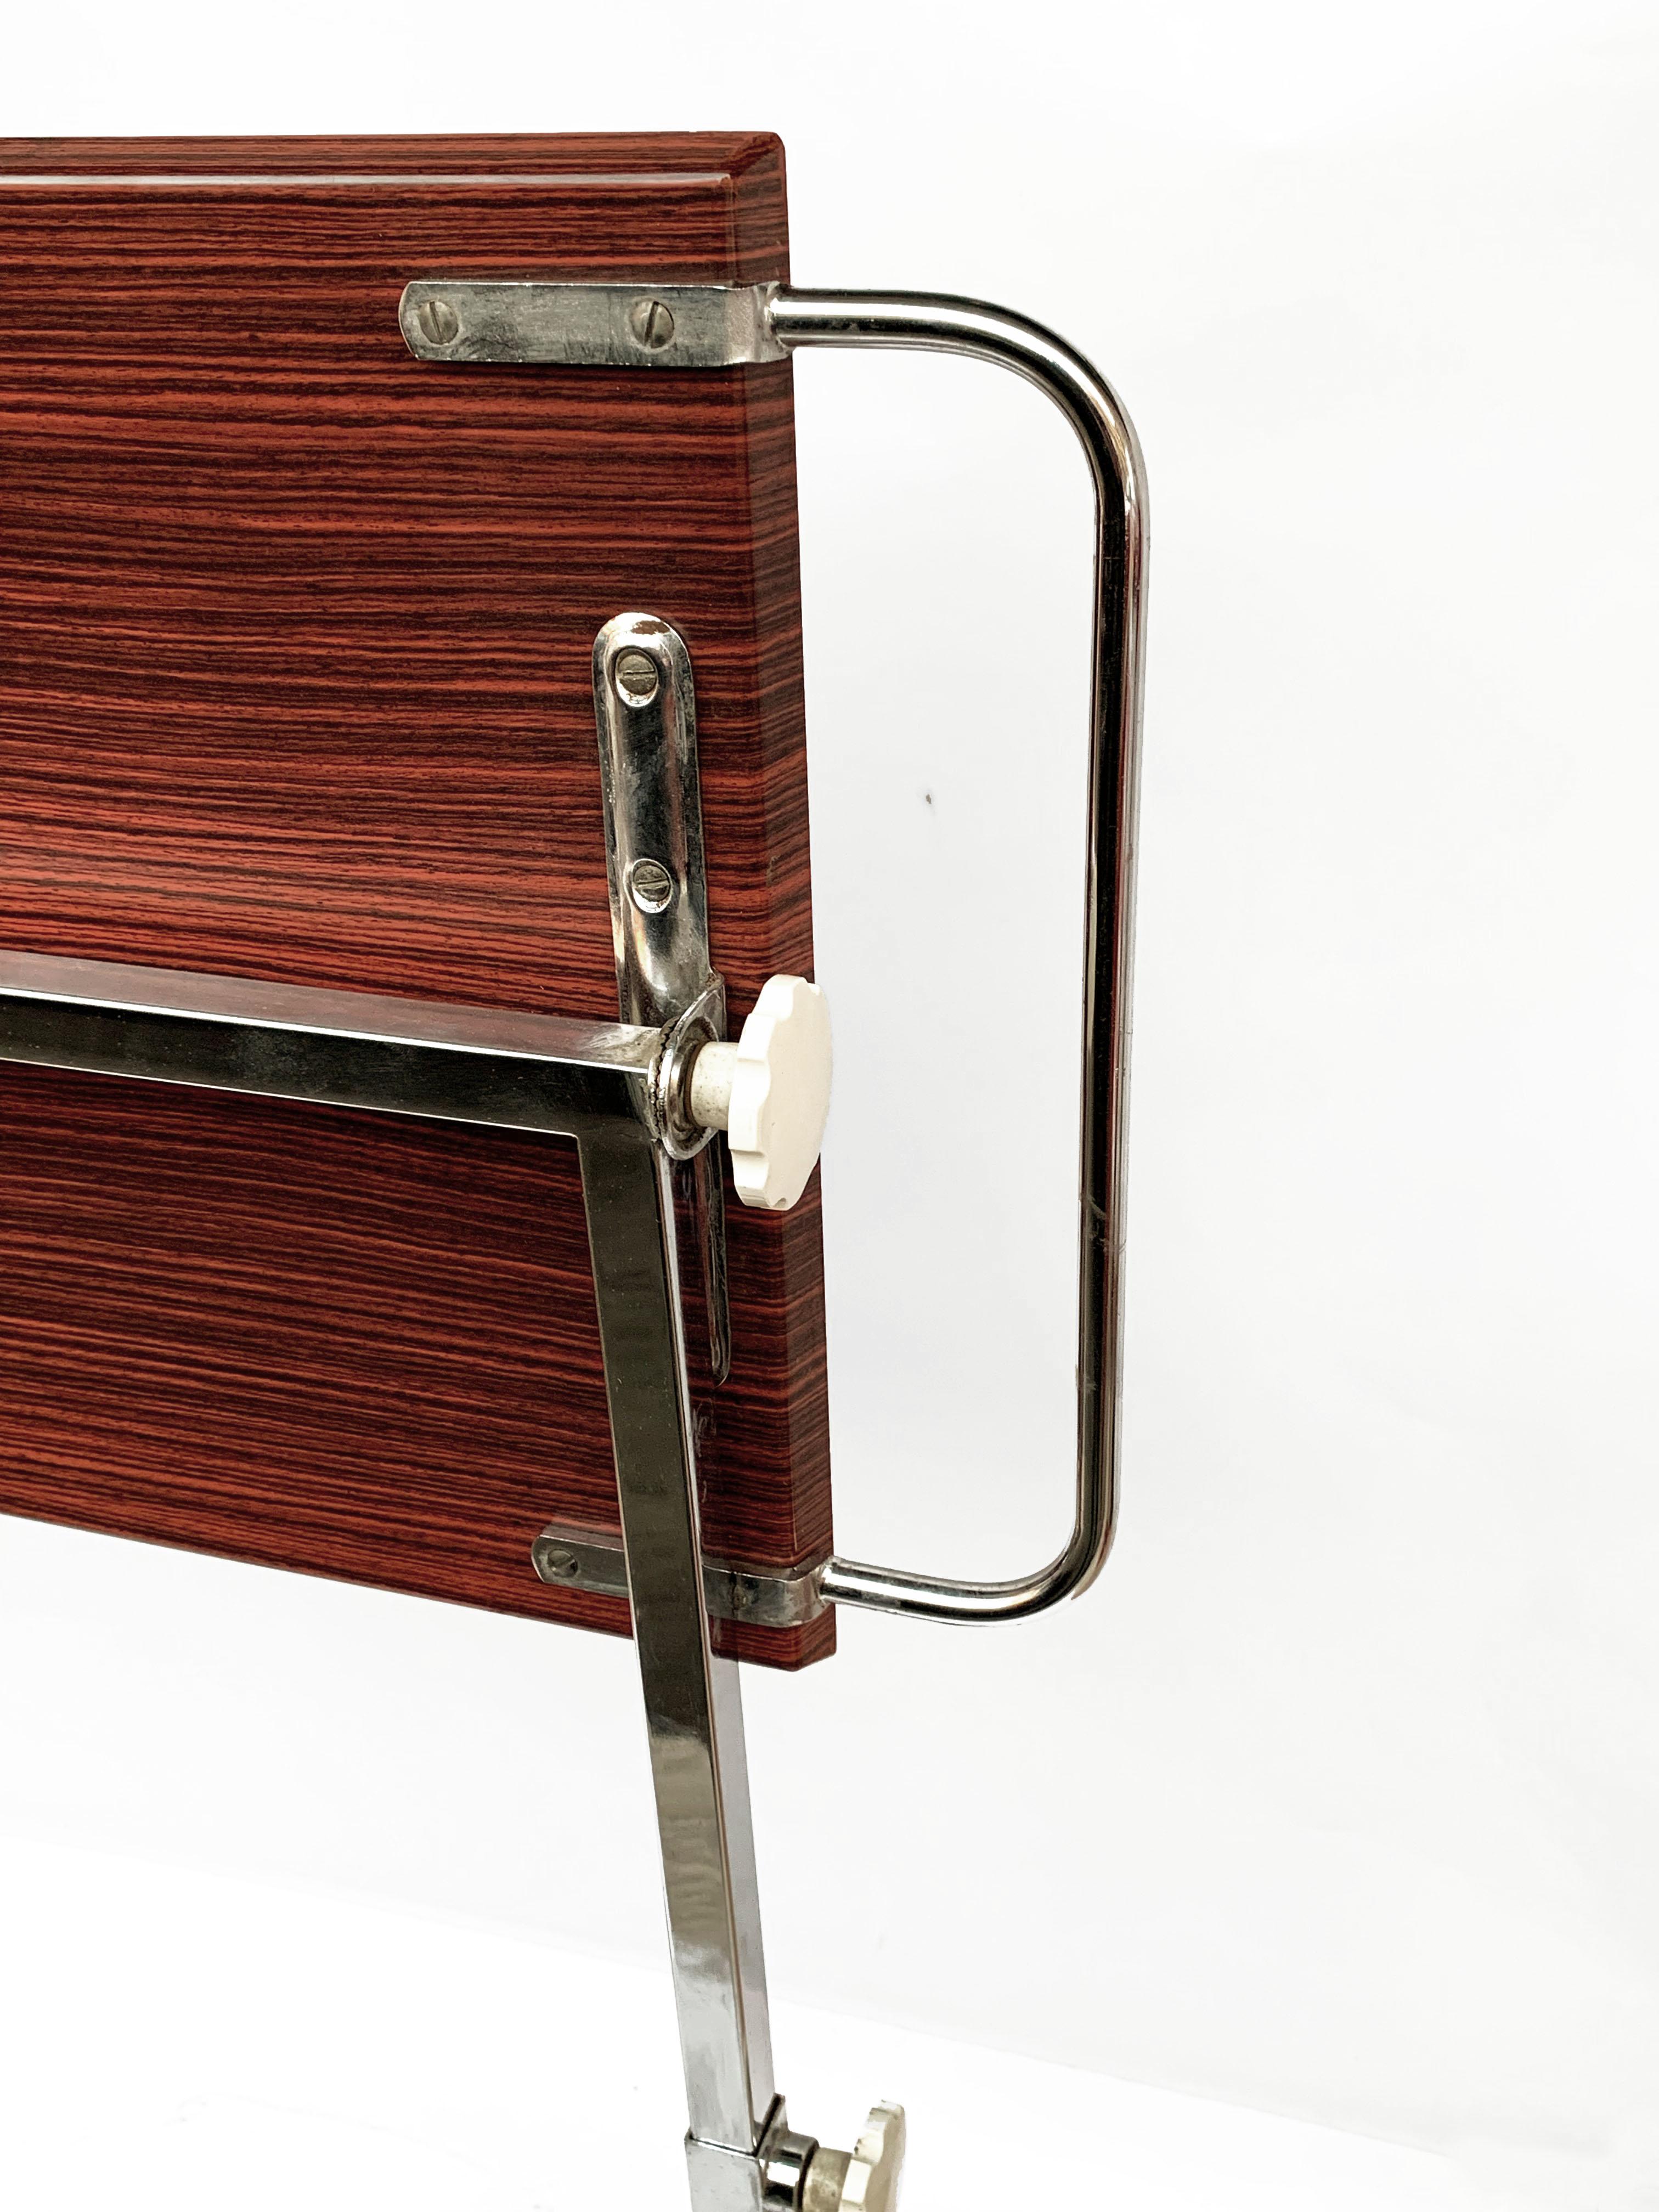 Mid-20th Century Vintage Service Trolley by Variett Bremshey for Bremshey & Co., Germany, 1966 For Sale